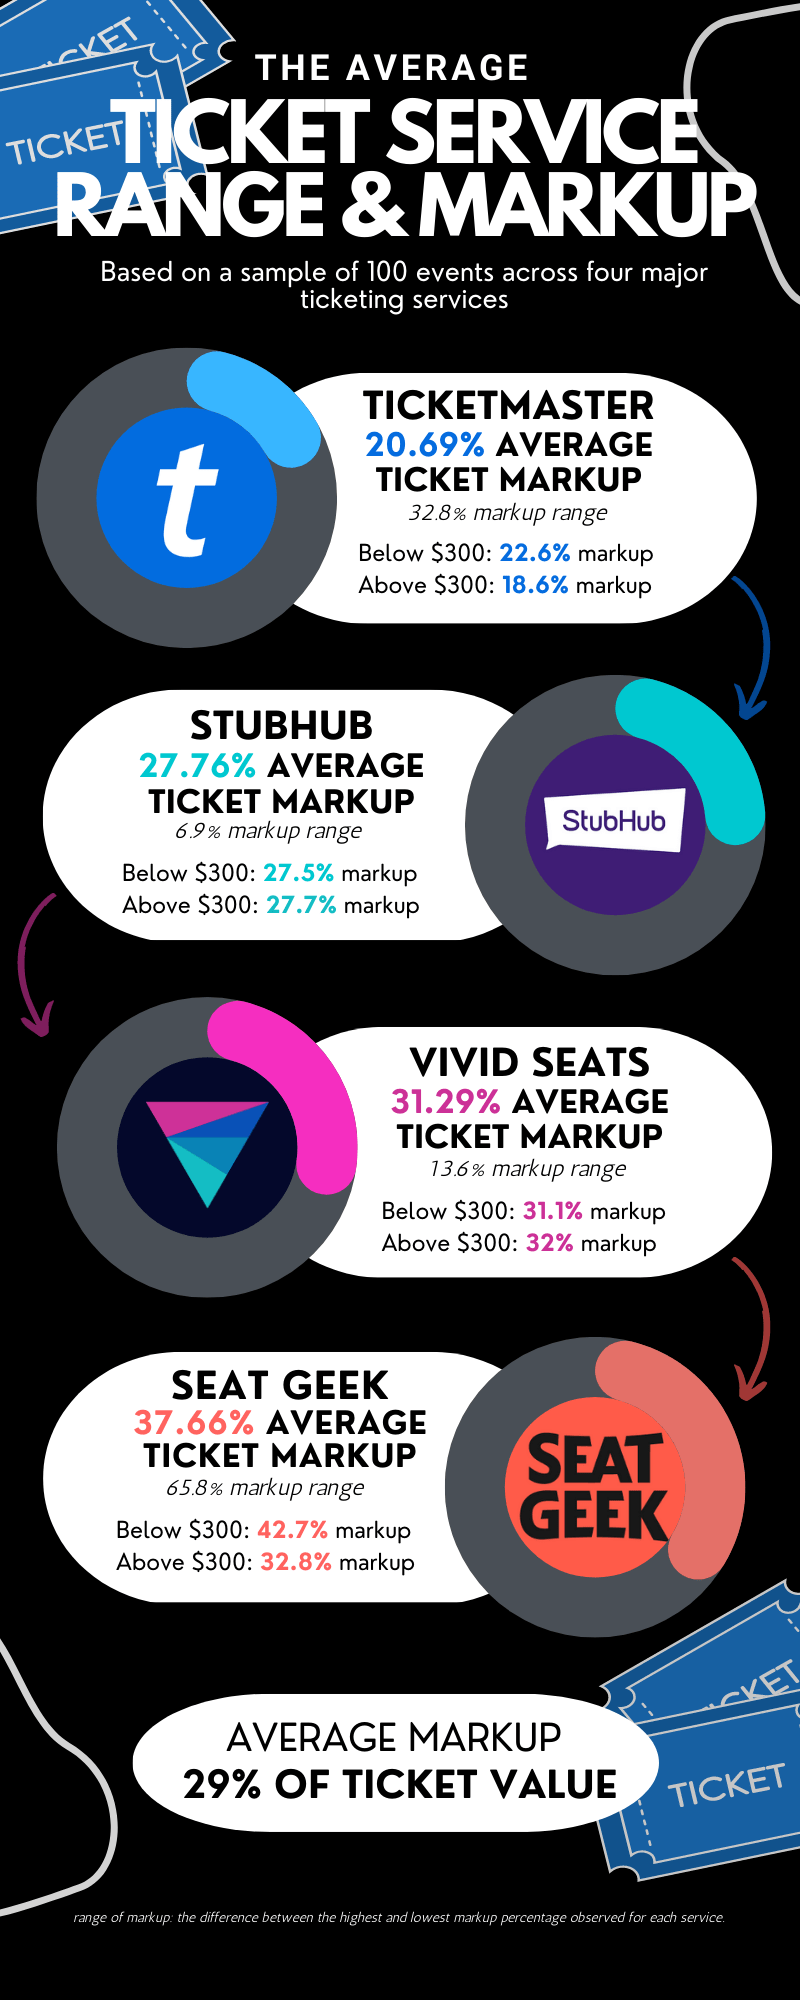 A graphic showing the difference in markup costs for major ticket services